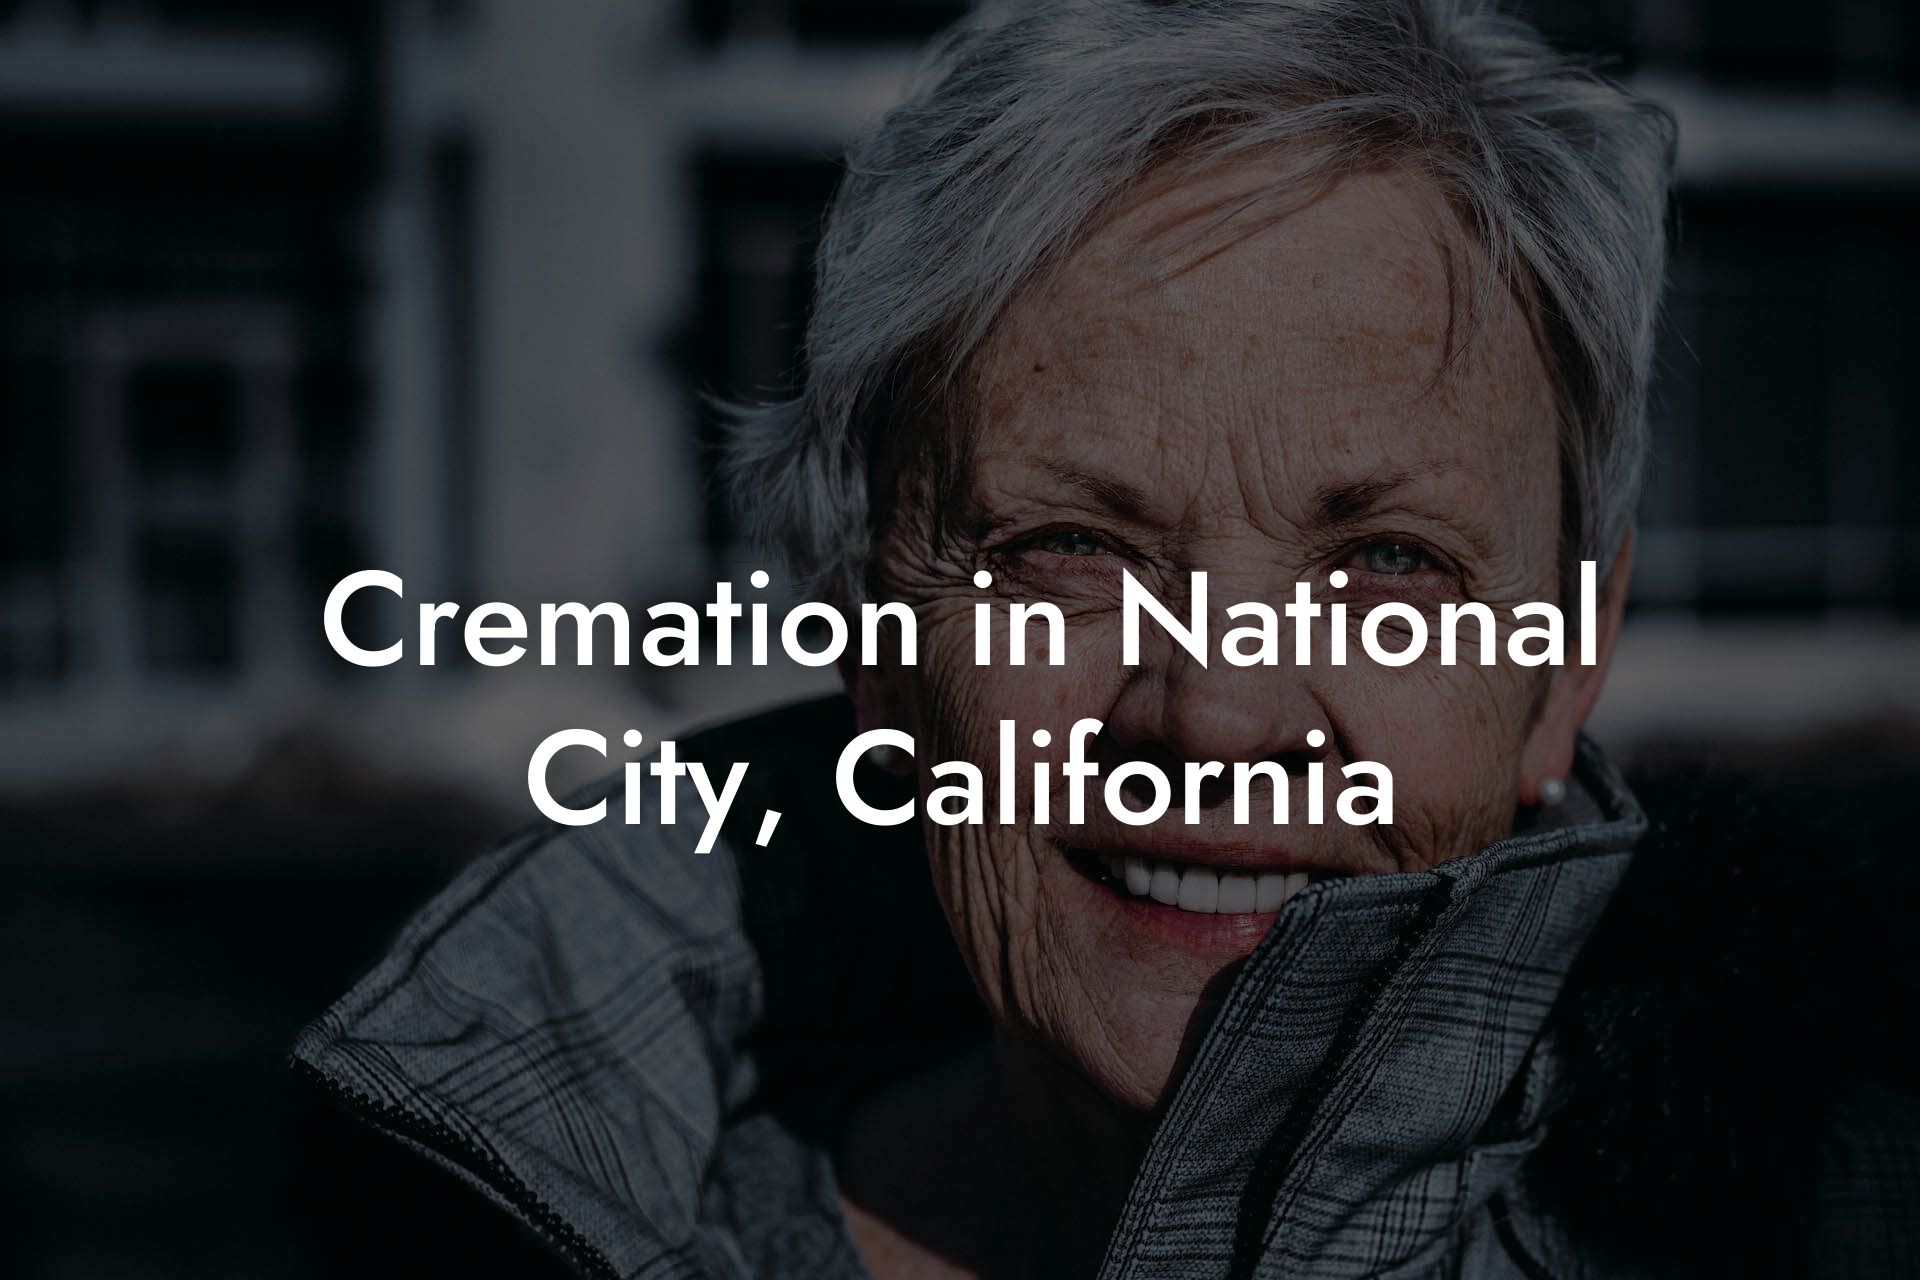 Cremation in National City, California